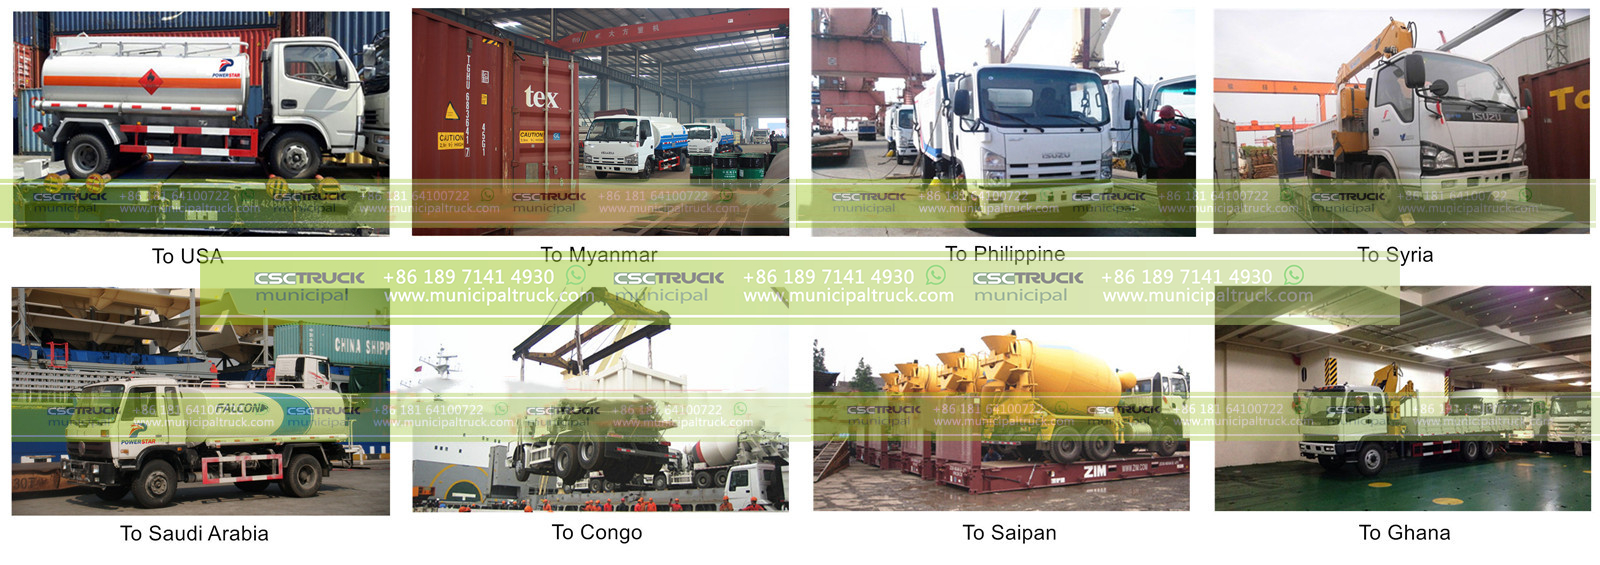 CSCTRUCK municipal water vacuum trucks for shipping to Myanmar and other countries